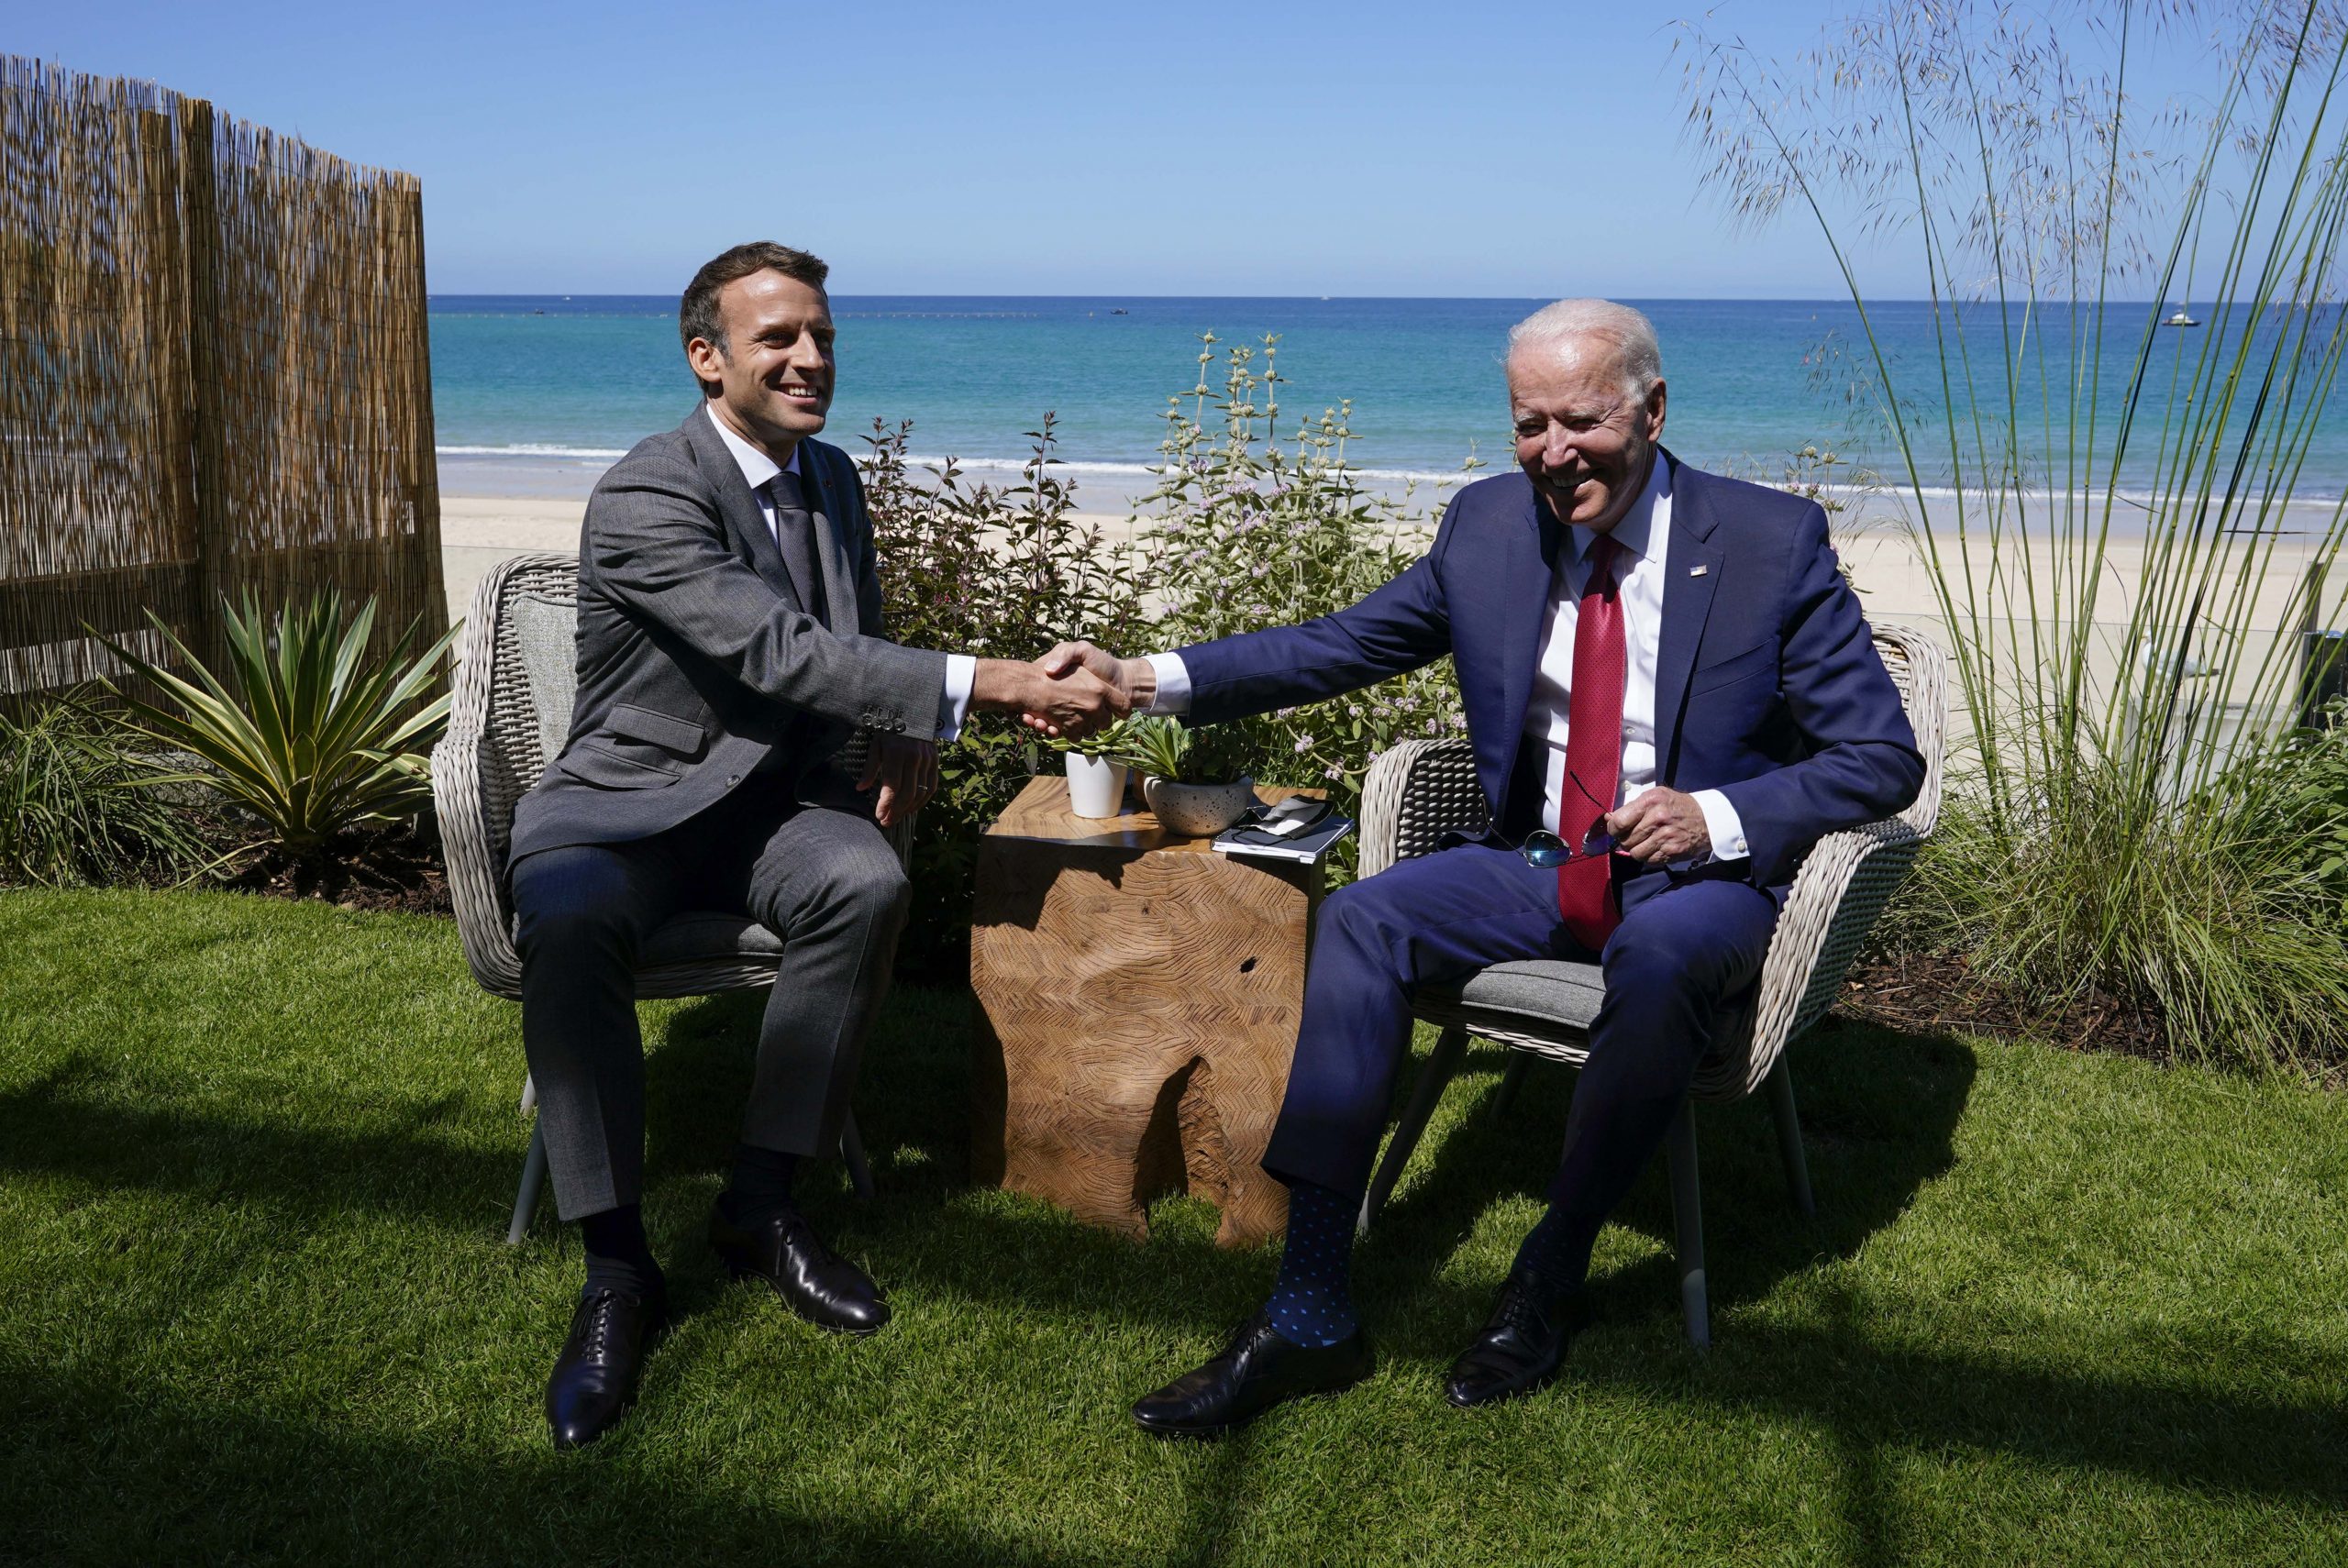 All about Biden-Macron bilateral meeting at the G7 summit